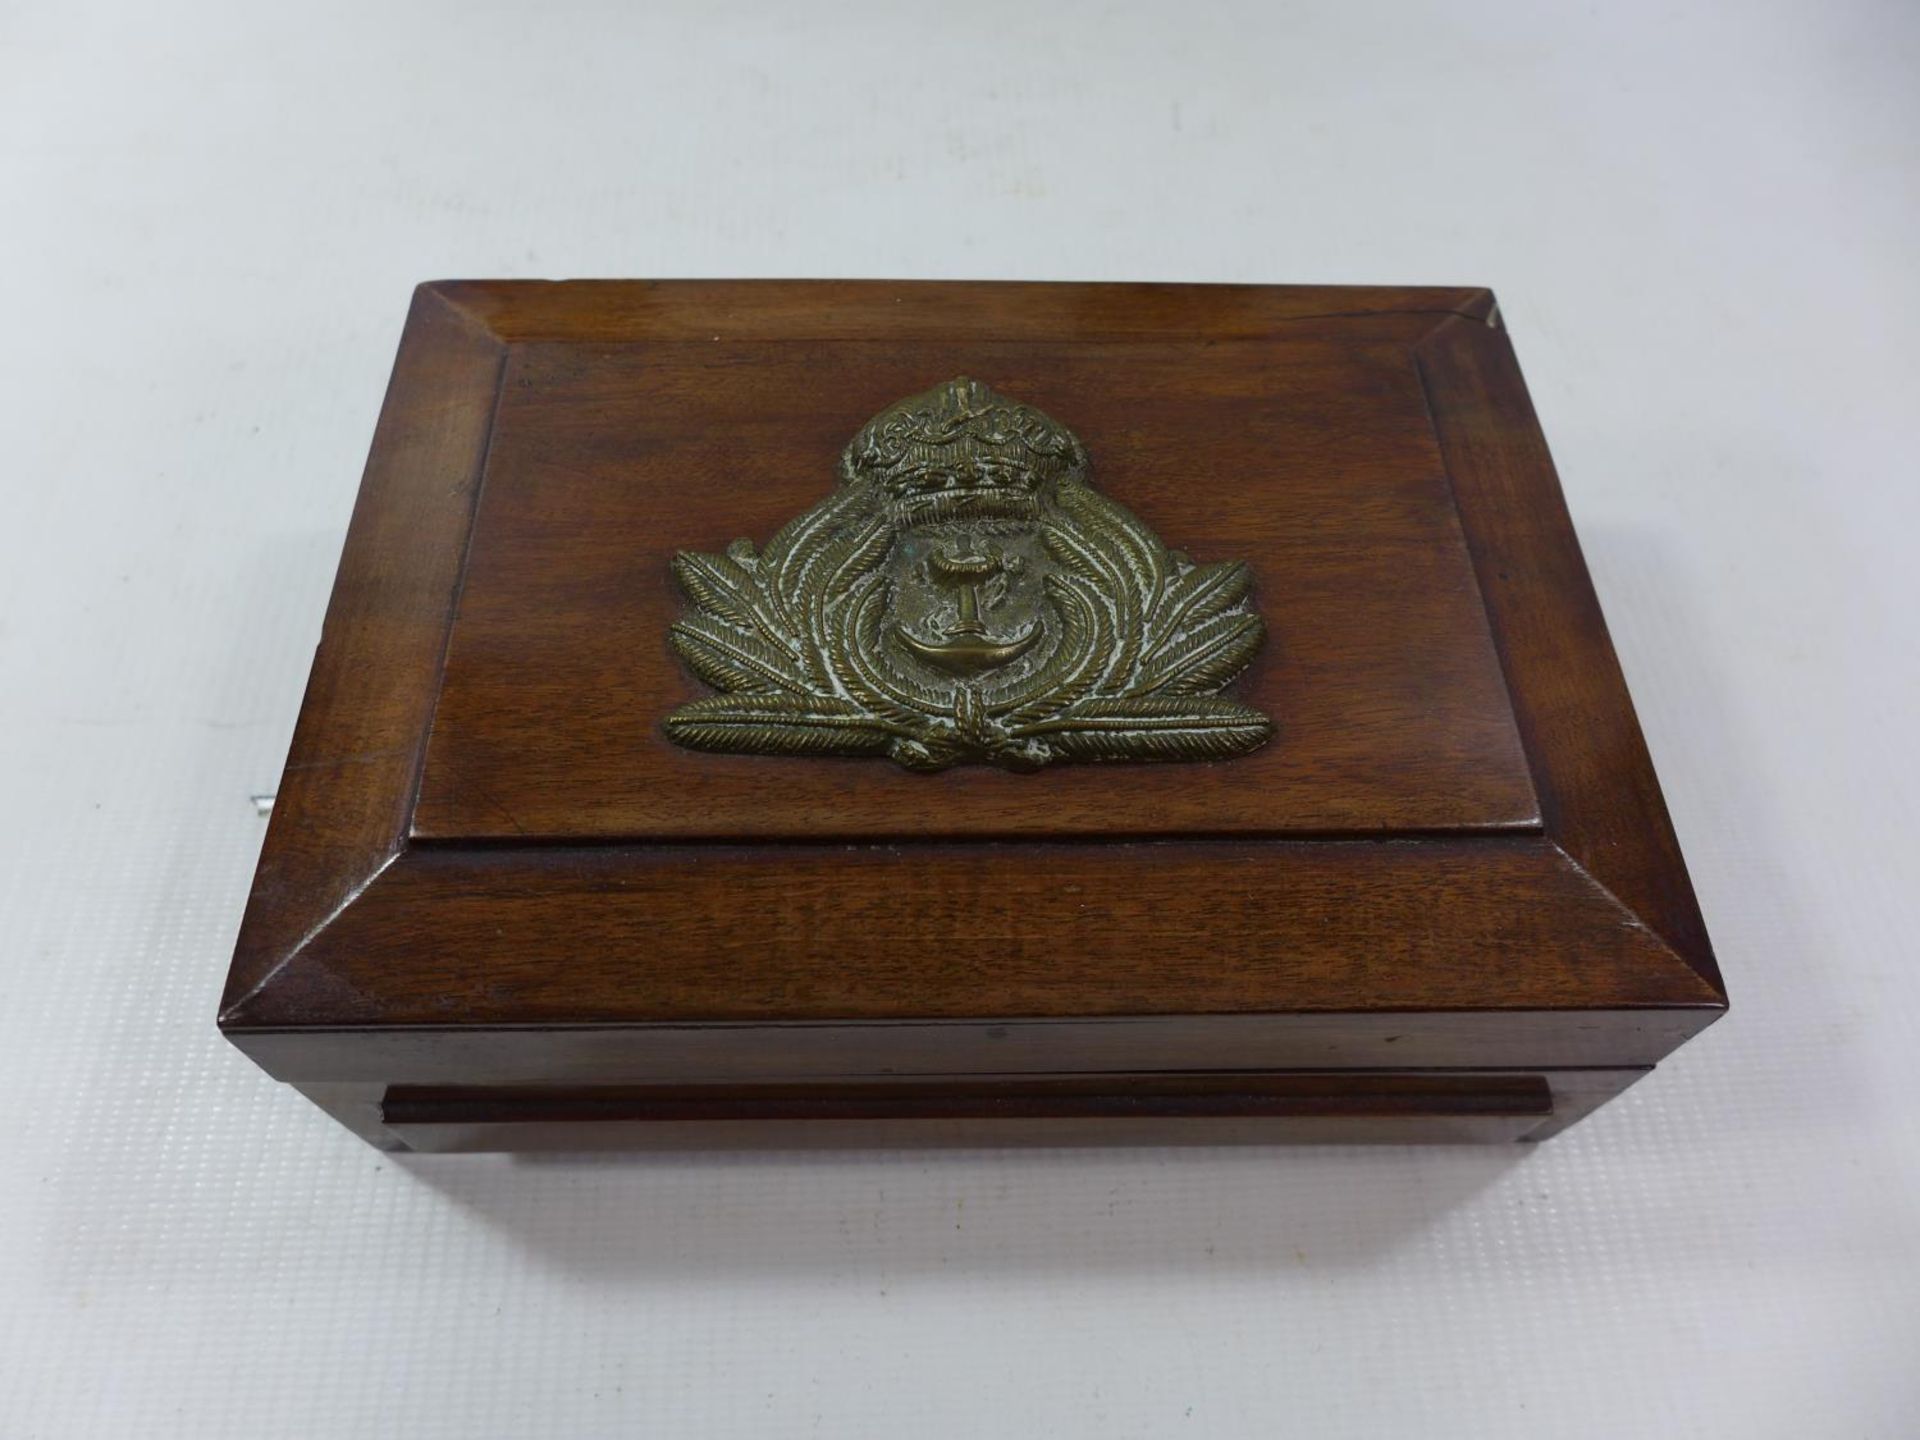 A MAHOGANY BOX WITH BRASS NAVAL BADGE AND A FRAMED ACCOUNT OF WAGES MARKED TITANIC, DATED 1912, 22 X - Image 2 of 5